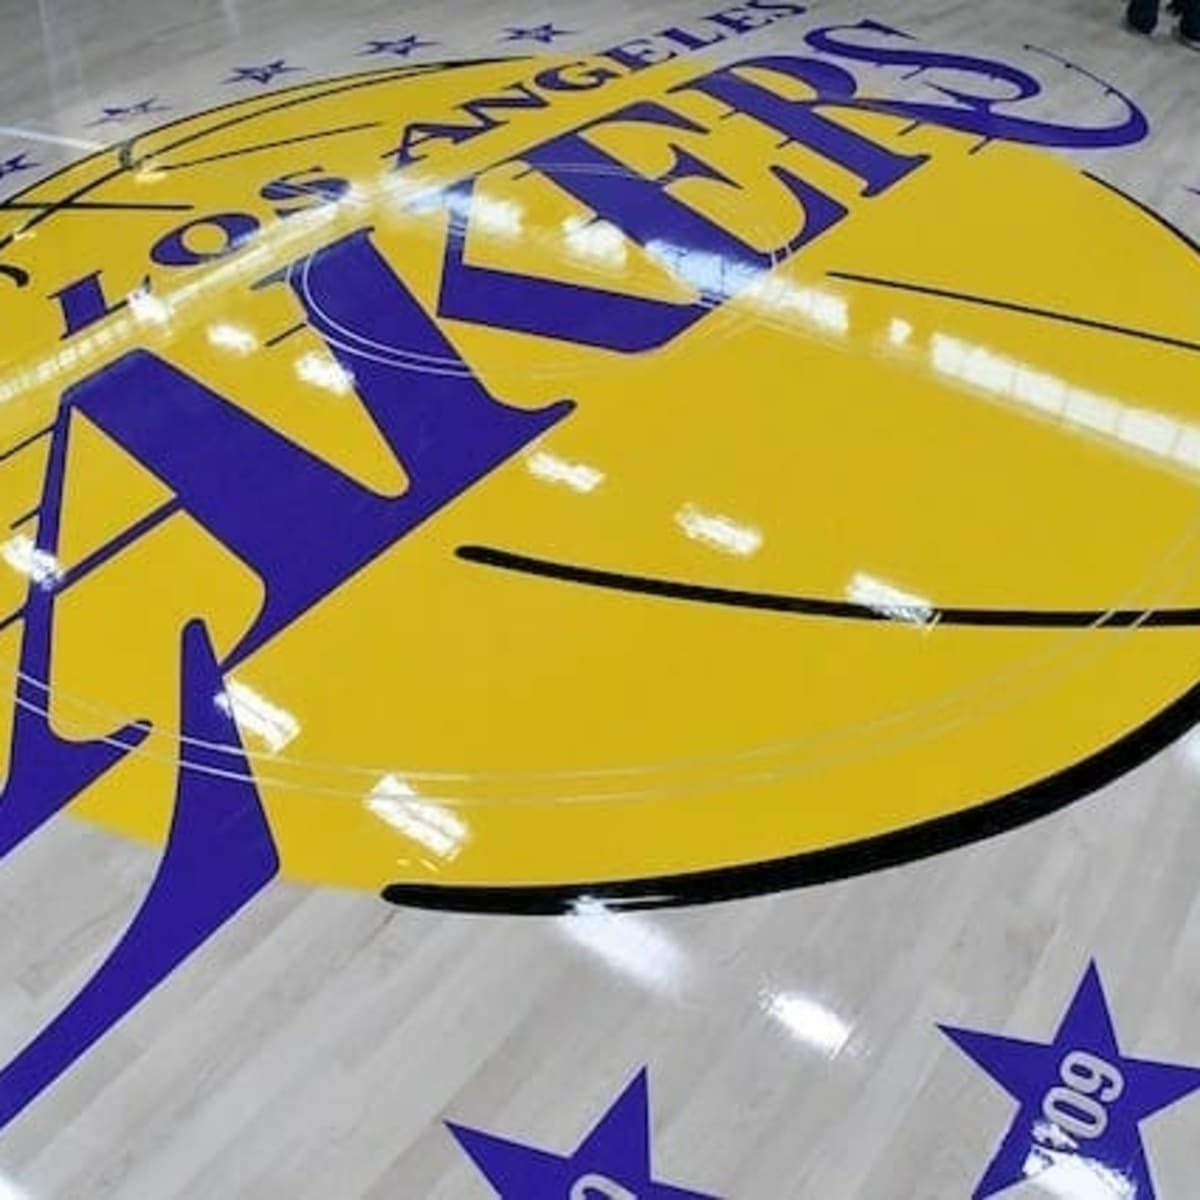 Lakers News: First Great Lakers Center Will Have Jersey